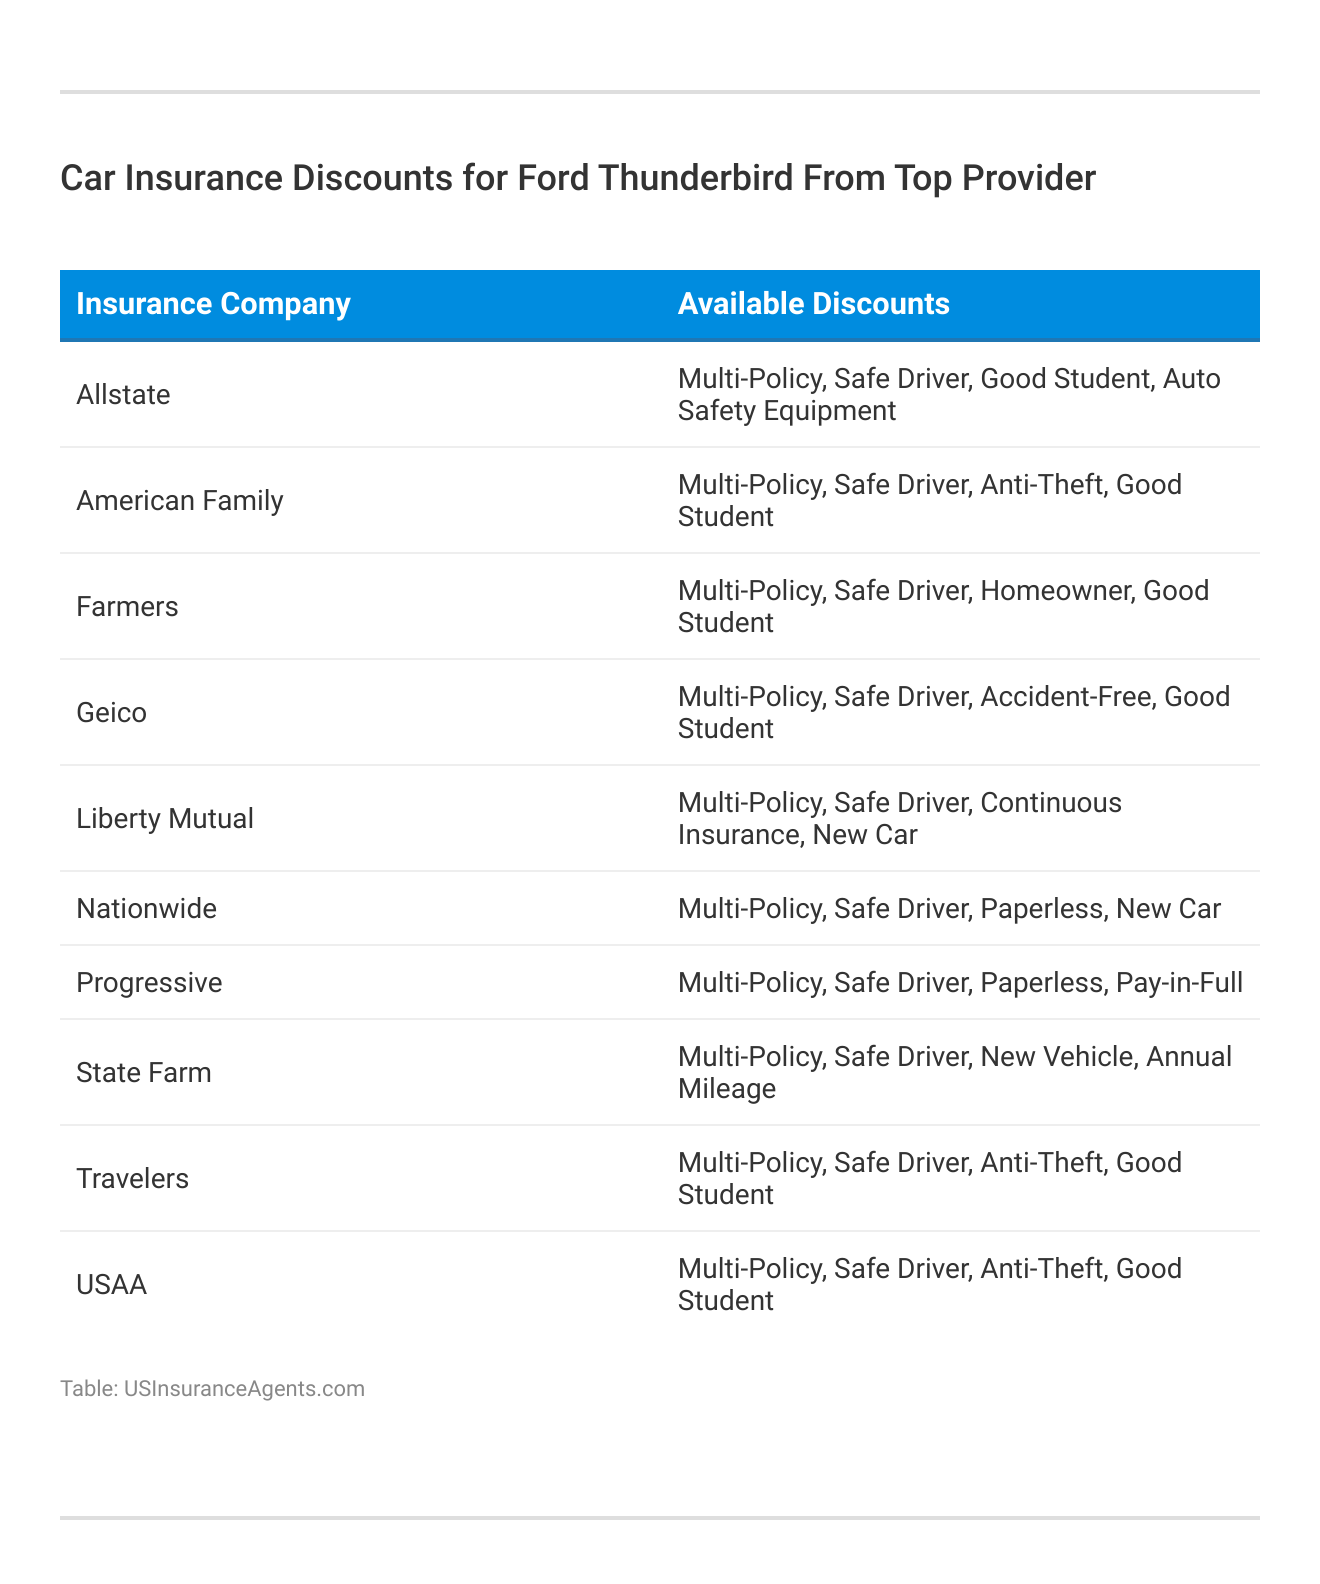 <h3>Car Insurance Discounts for Ford Thunderbird From Top Provider</h3>